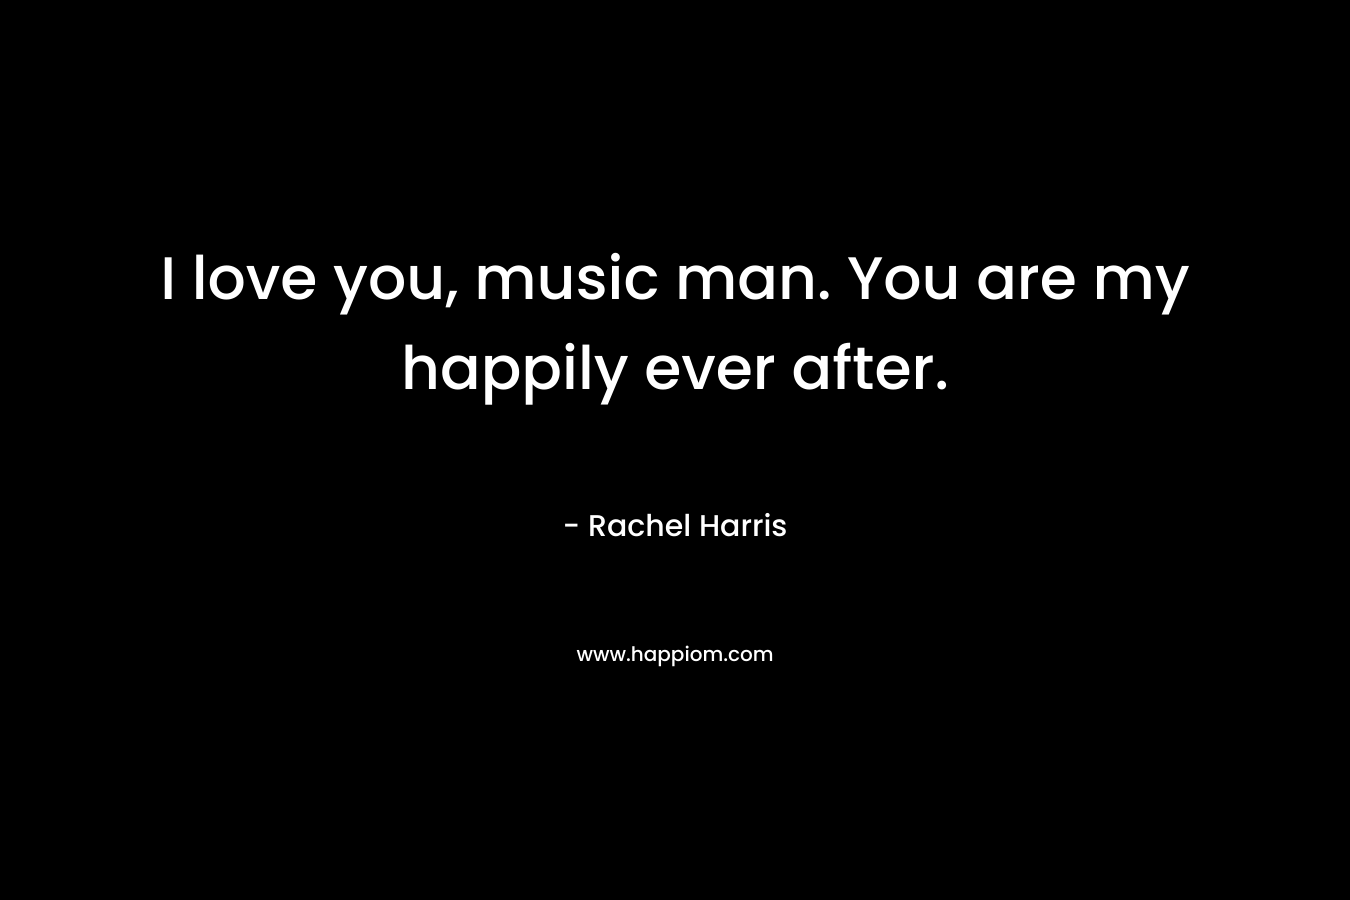 I love you, music man. You are my happily ever after.